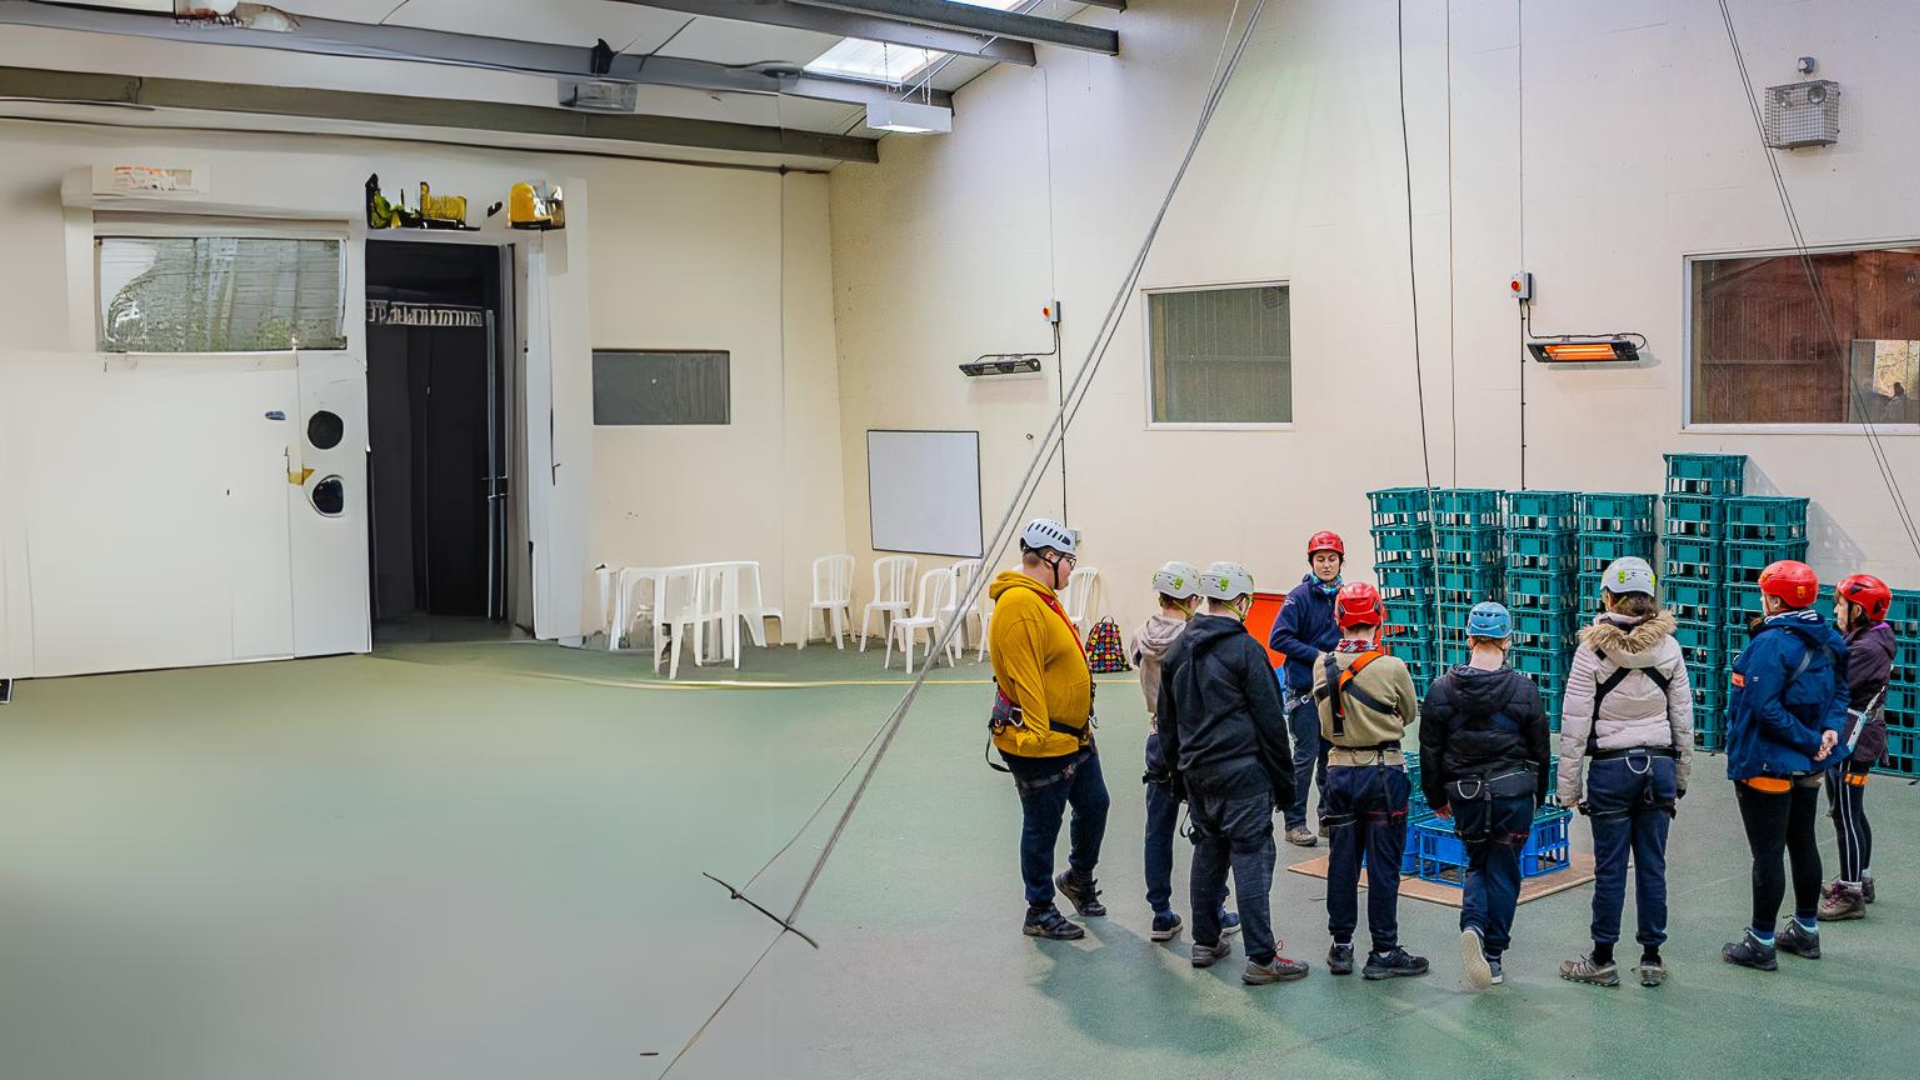 An extended view of the indoor sports hall at Calvert Exmoor. To the left is empty space and to the right is a group of people wearing harnesses and helmets with their backs to the camera, watching a Calvert Exmoor instructor who is explaining the activity of Crate Stacking. There is a pile of crates in the background.